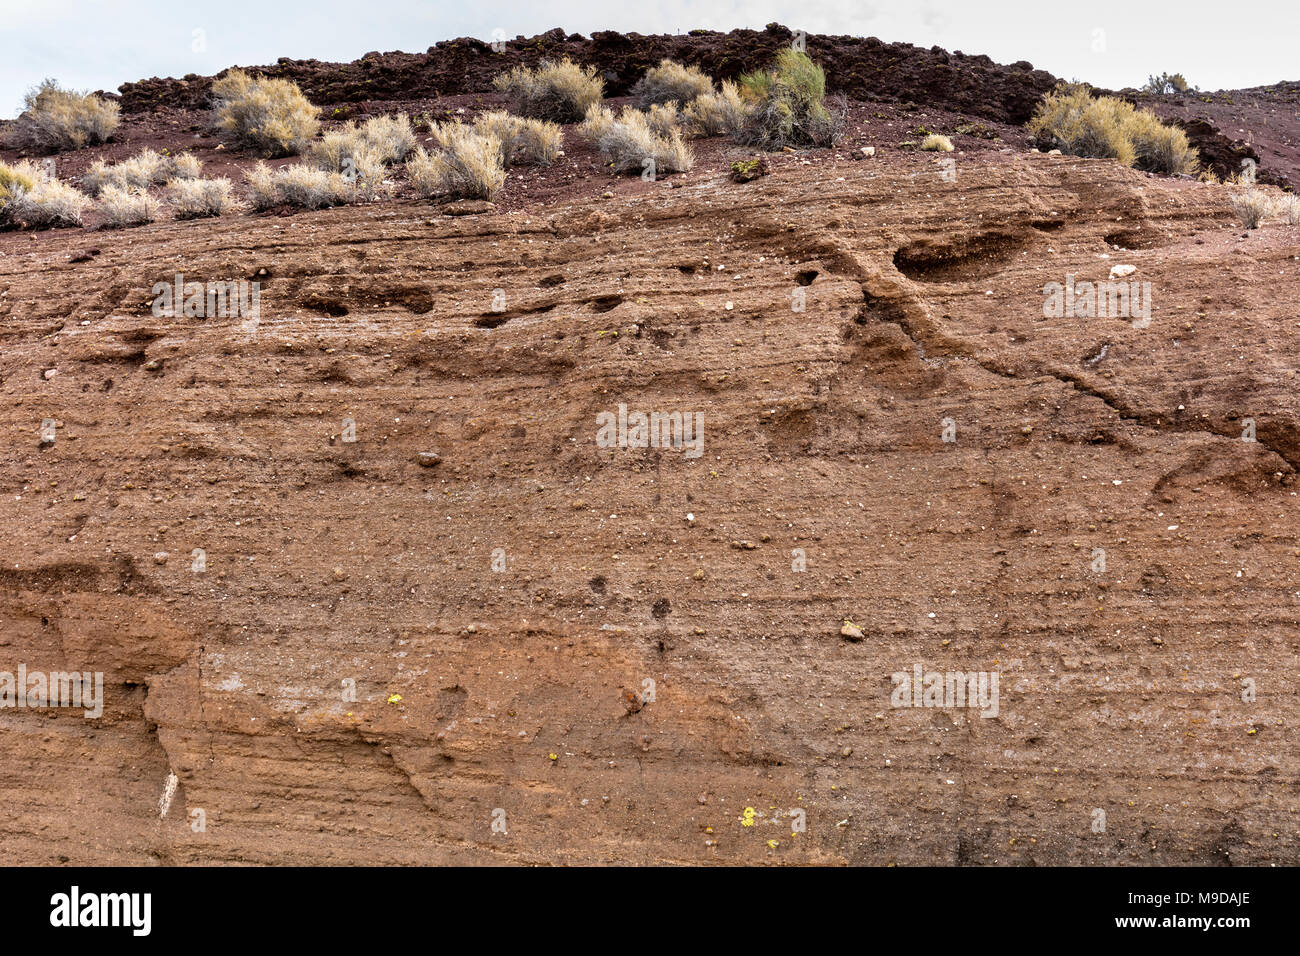 Exposed Strata Showing Volcanic Ash Deposition, Sunset Crater National Monument, Arizona Stock Photo